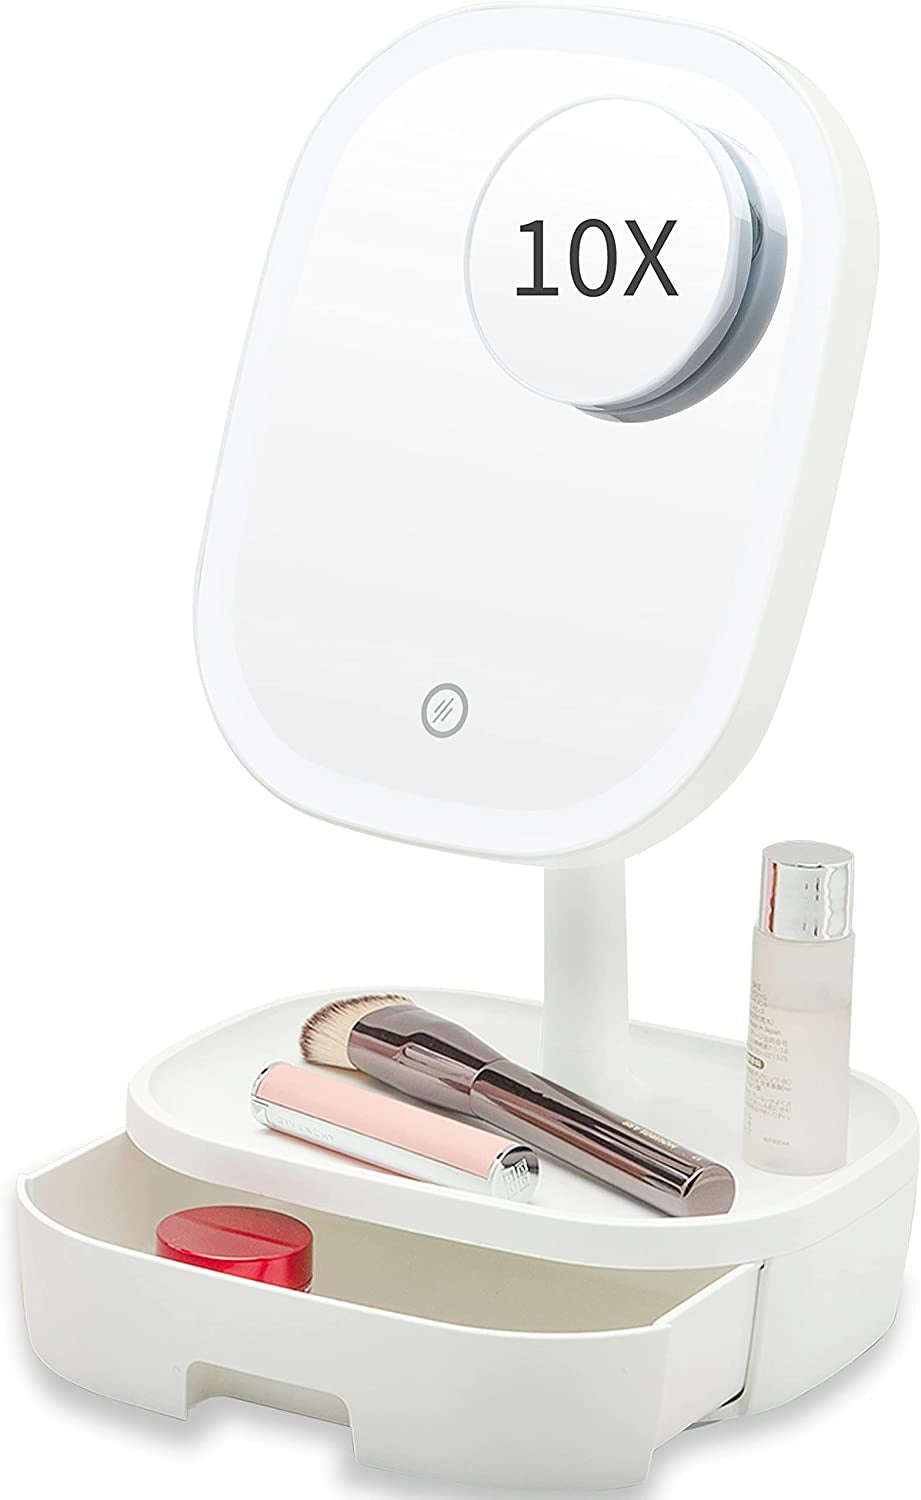 Professional title: " Portable Lighted Vanity Mirror with Magnification, Foldable Desk Mirror for Home and Travel - White"